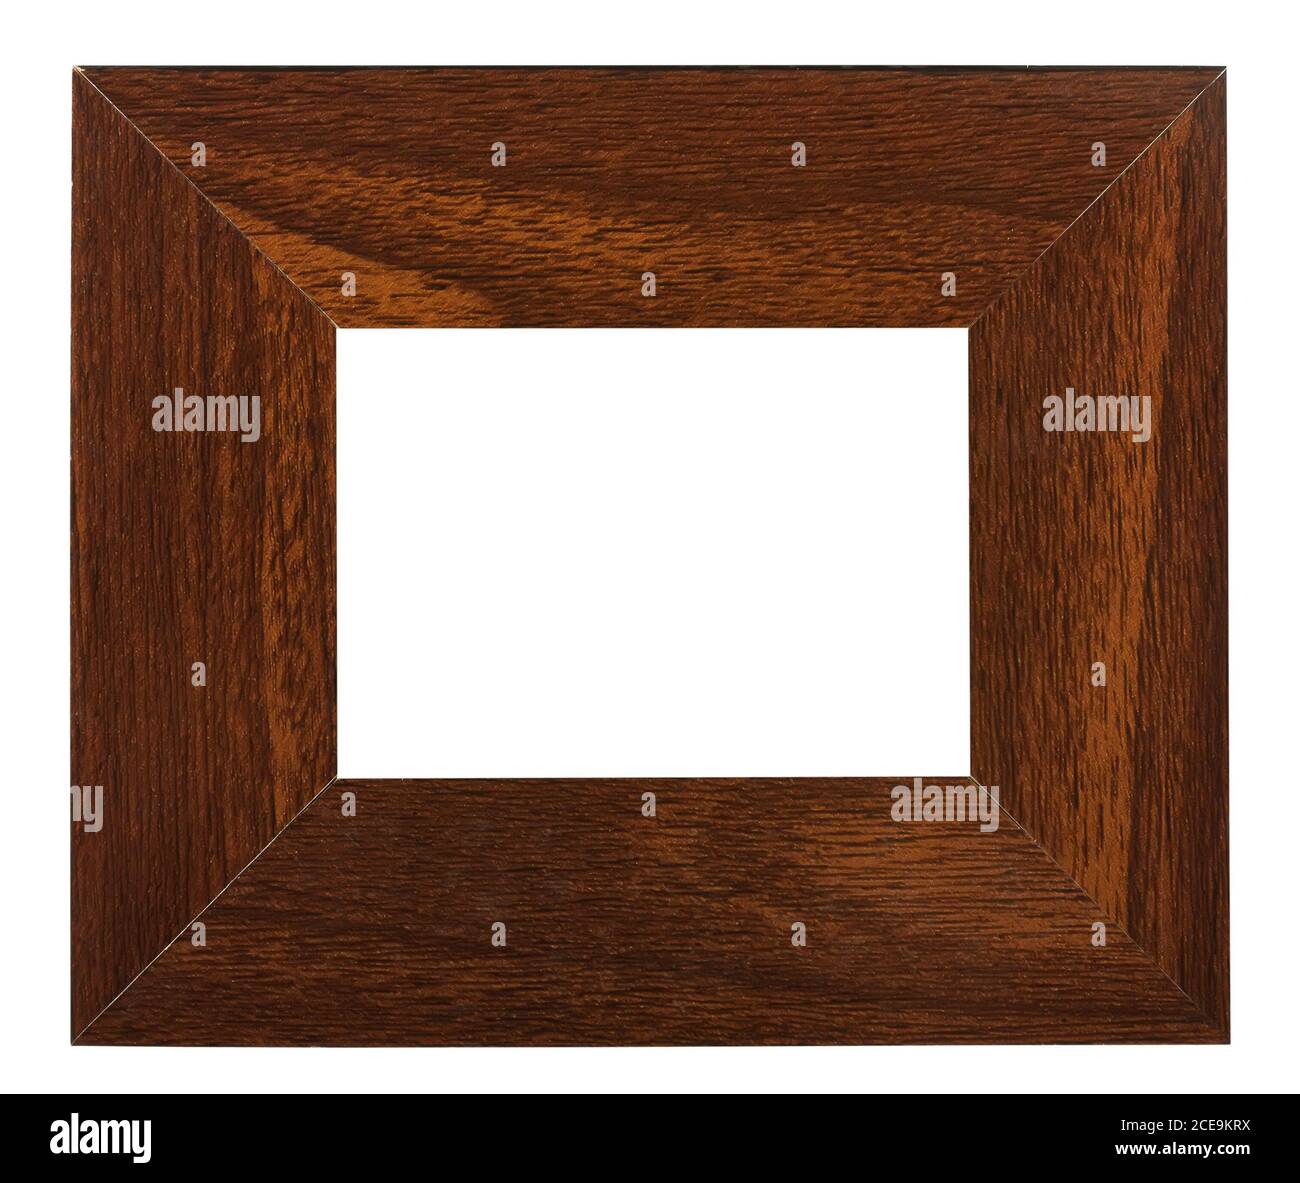 Brown wooden frame Stock Photo